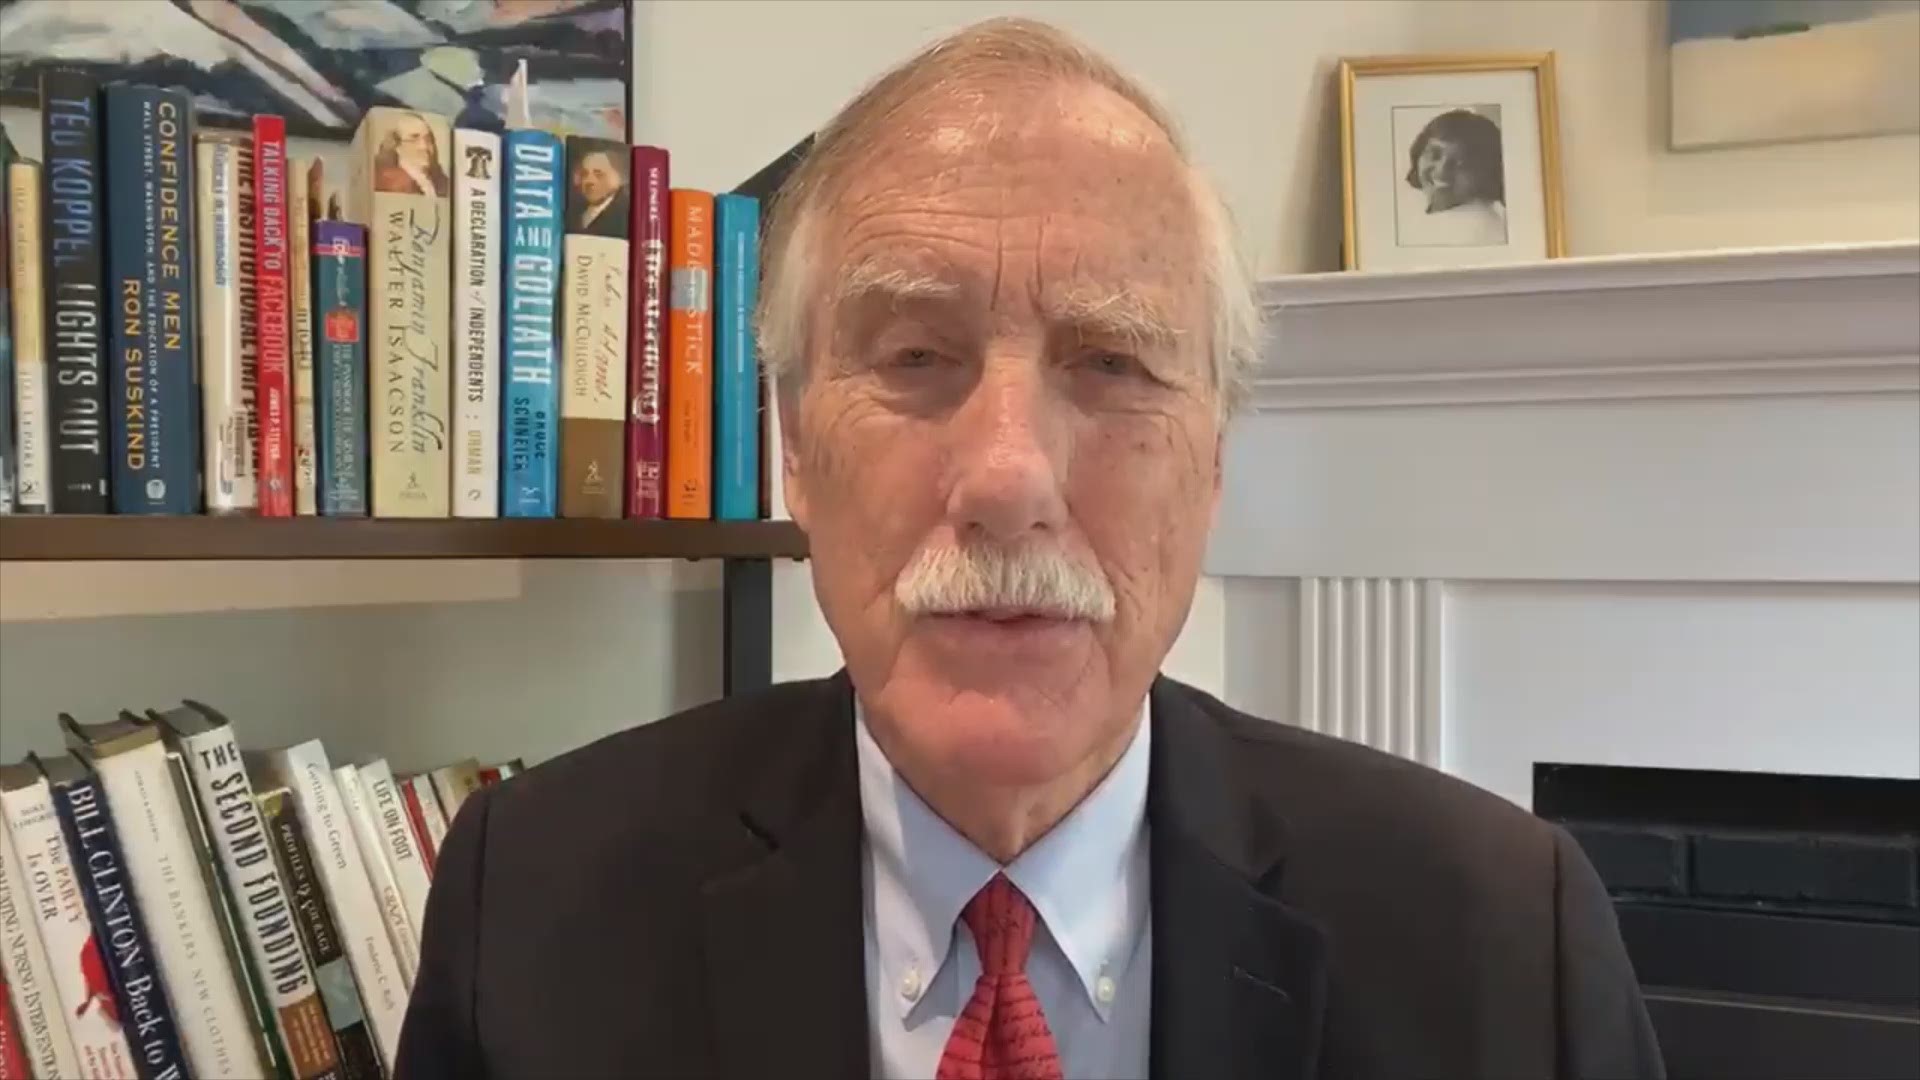 On Juneteenth, Maine Senator Angus King releases video recognizing need for reflection, importance of action to address systemic racial injustices.